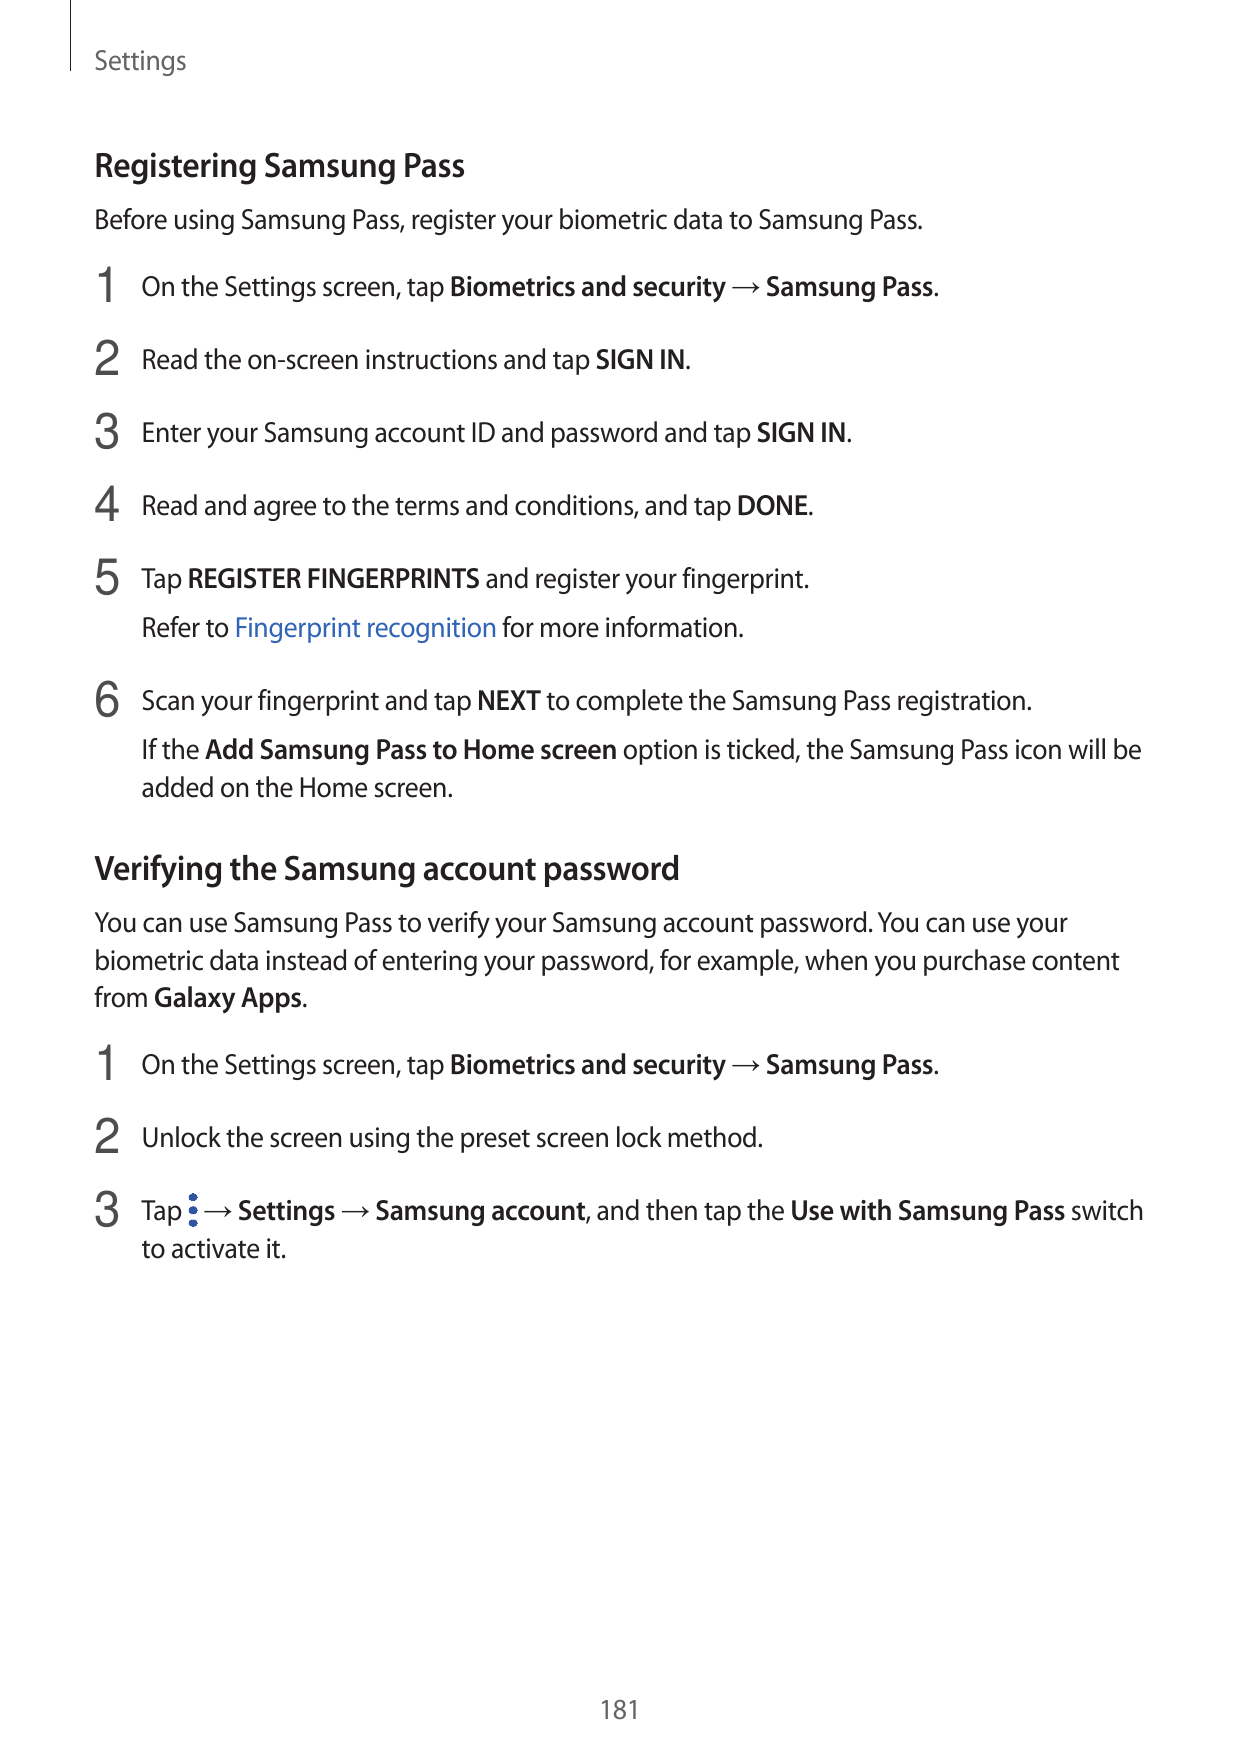 SettingsRegistering Samsung PassBefore using Samsung Pass, register your biometric data to Samsung Pass.1 On the Settings screen